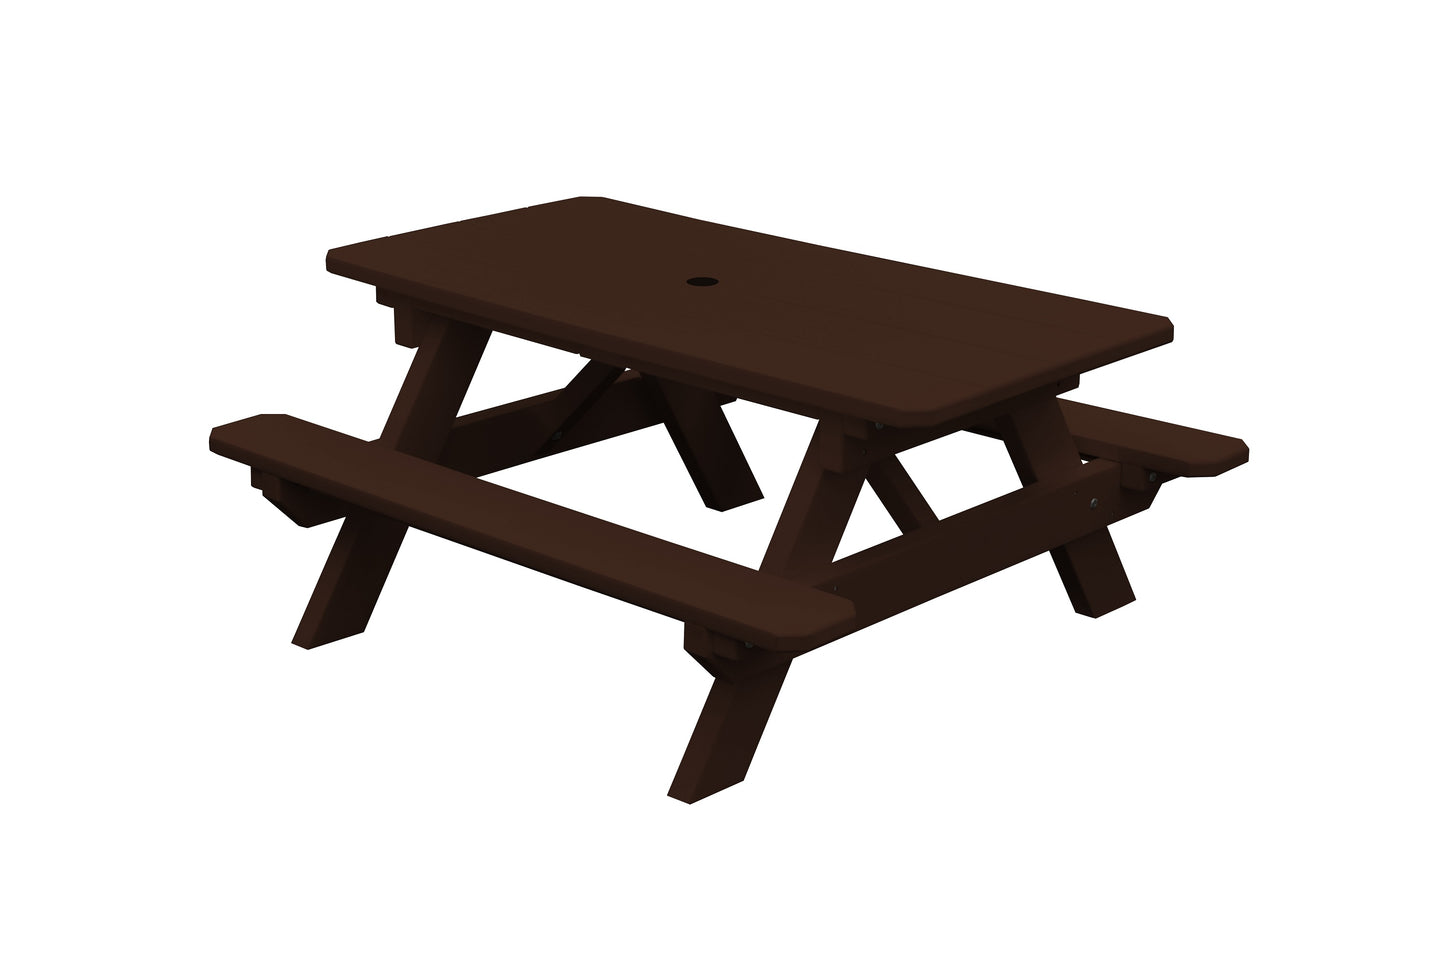 A&L Furniture Co. Recycled Plastic Kids Picnic Table - Specify for FREE 2" Umbrella Hole  - LEAD TIME TO SHIP 10 BUSINESS DAYS